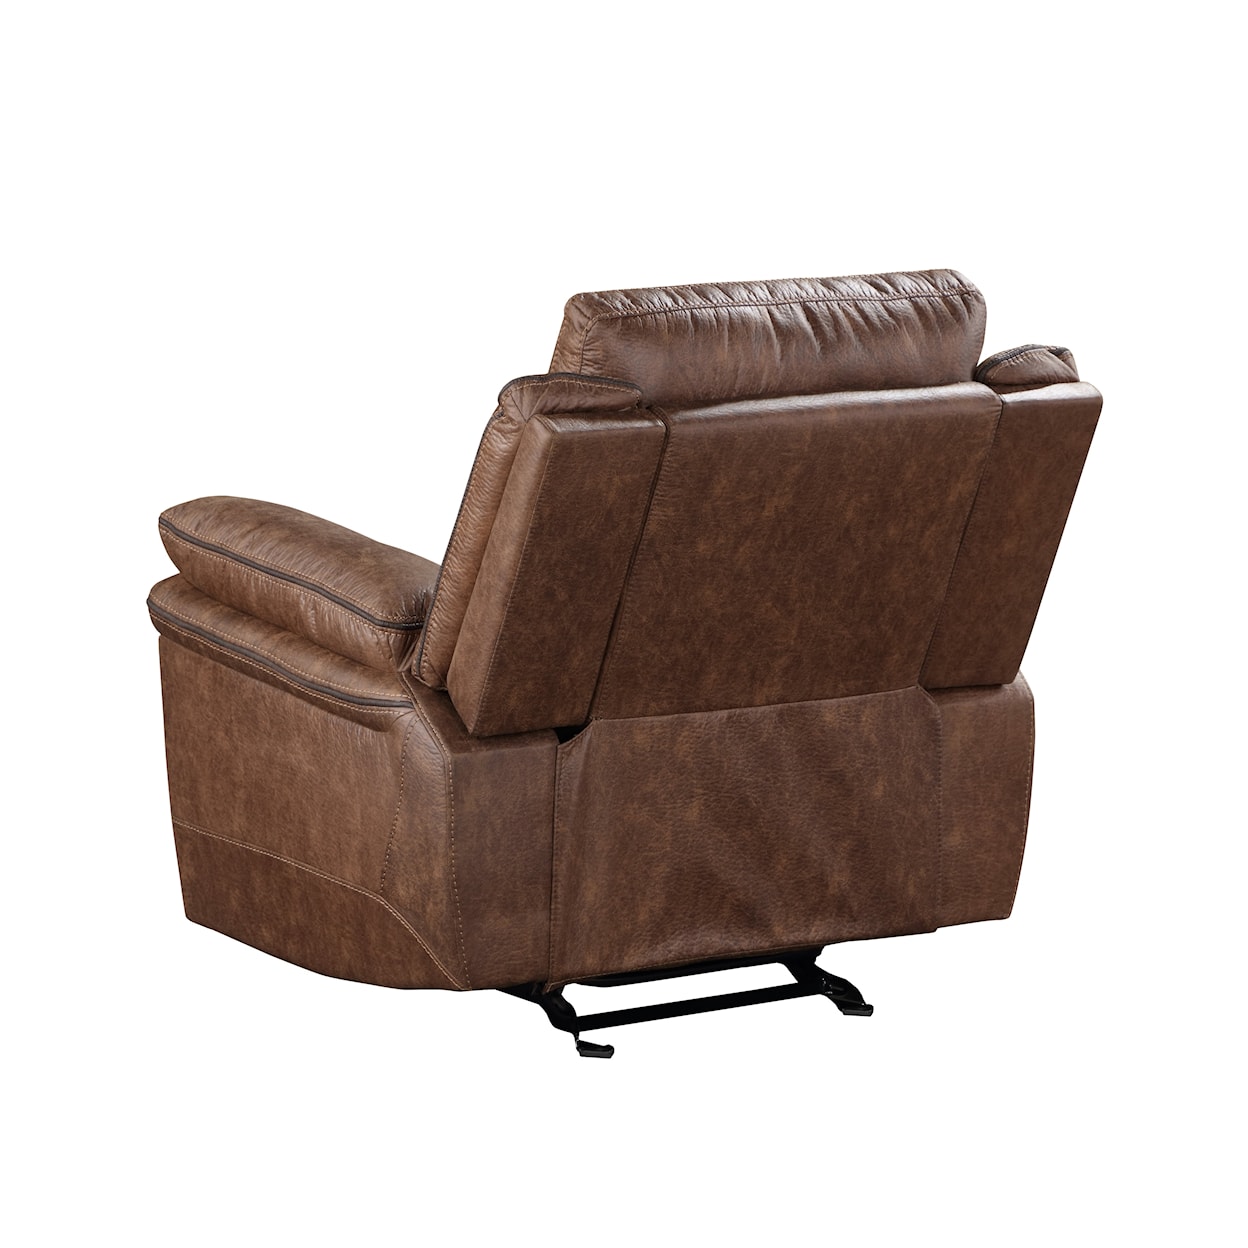 New Classic Ryland Glider Recliner